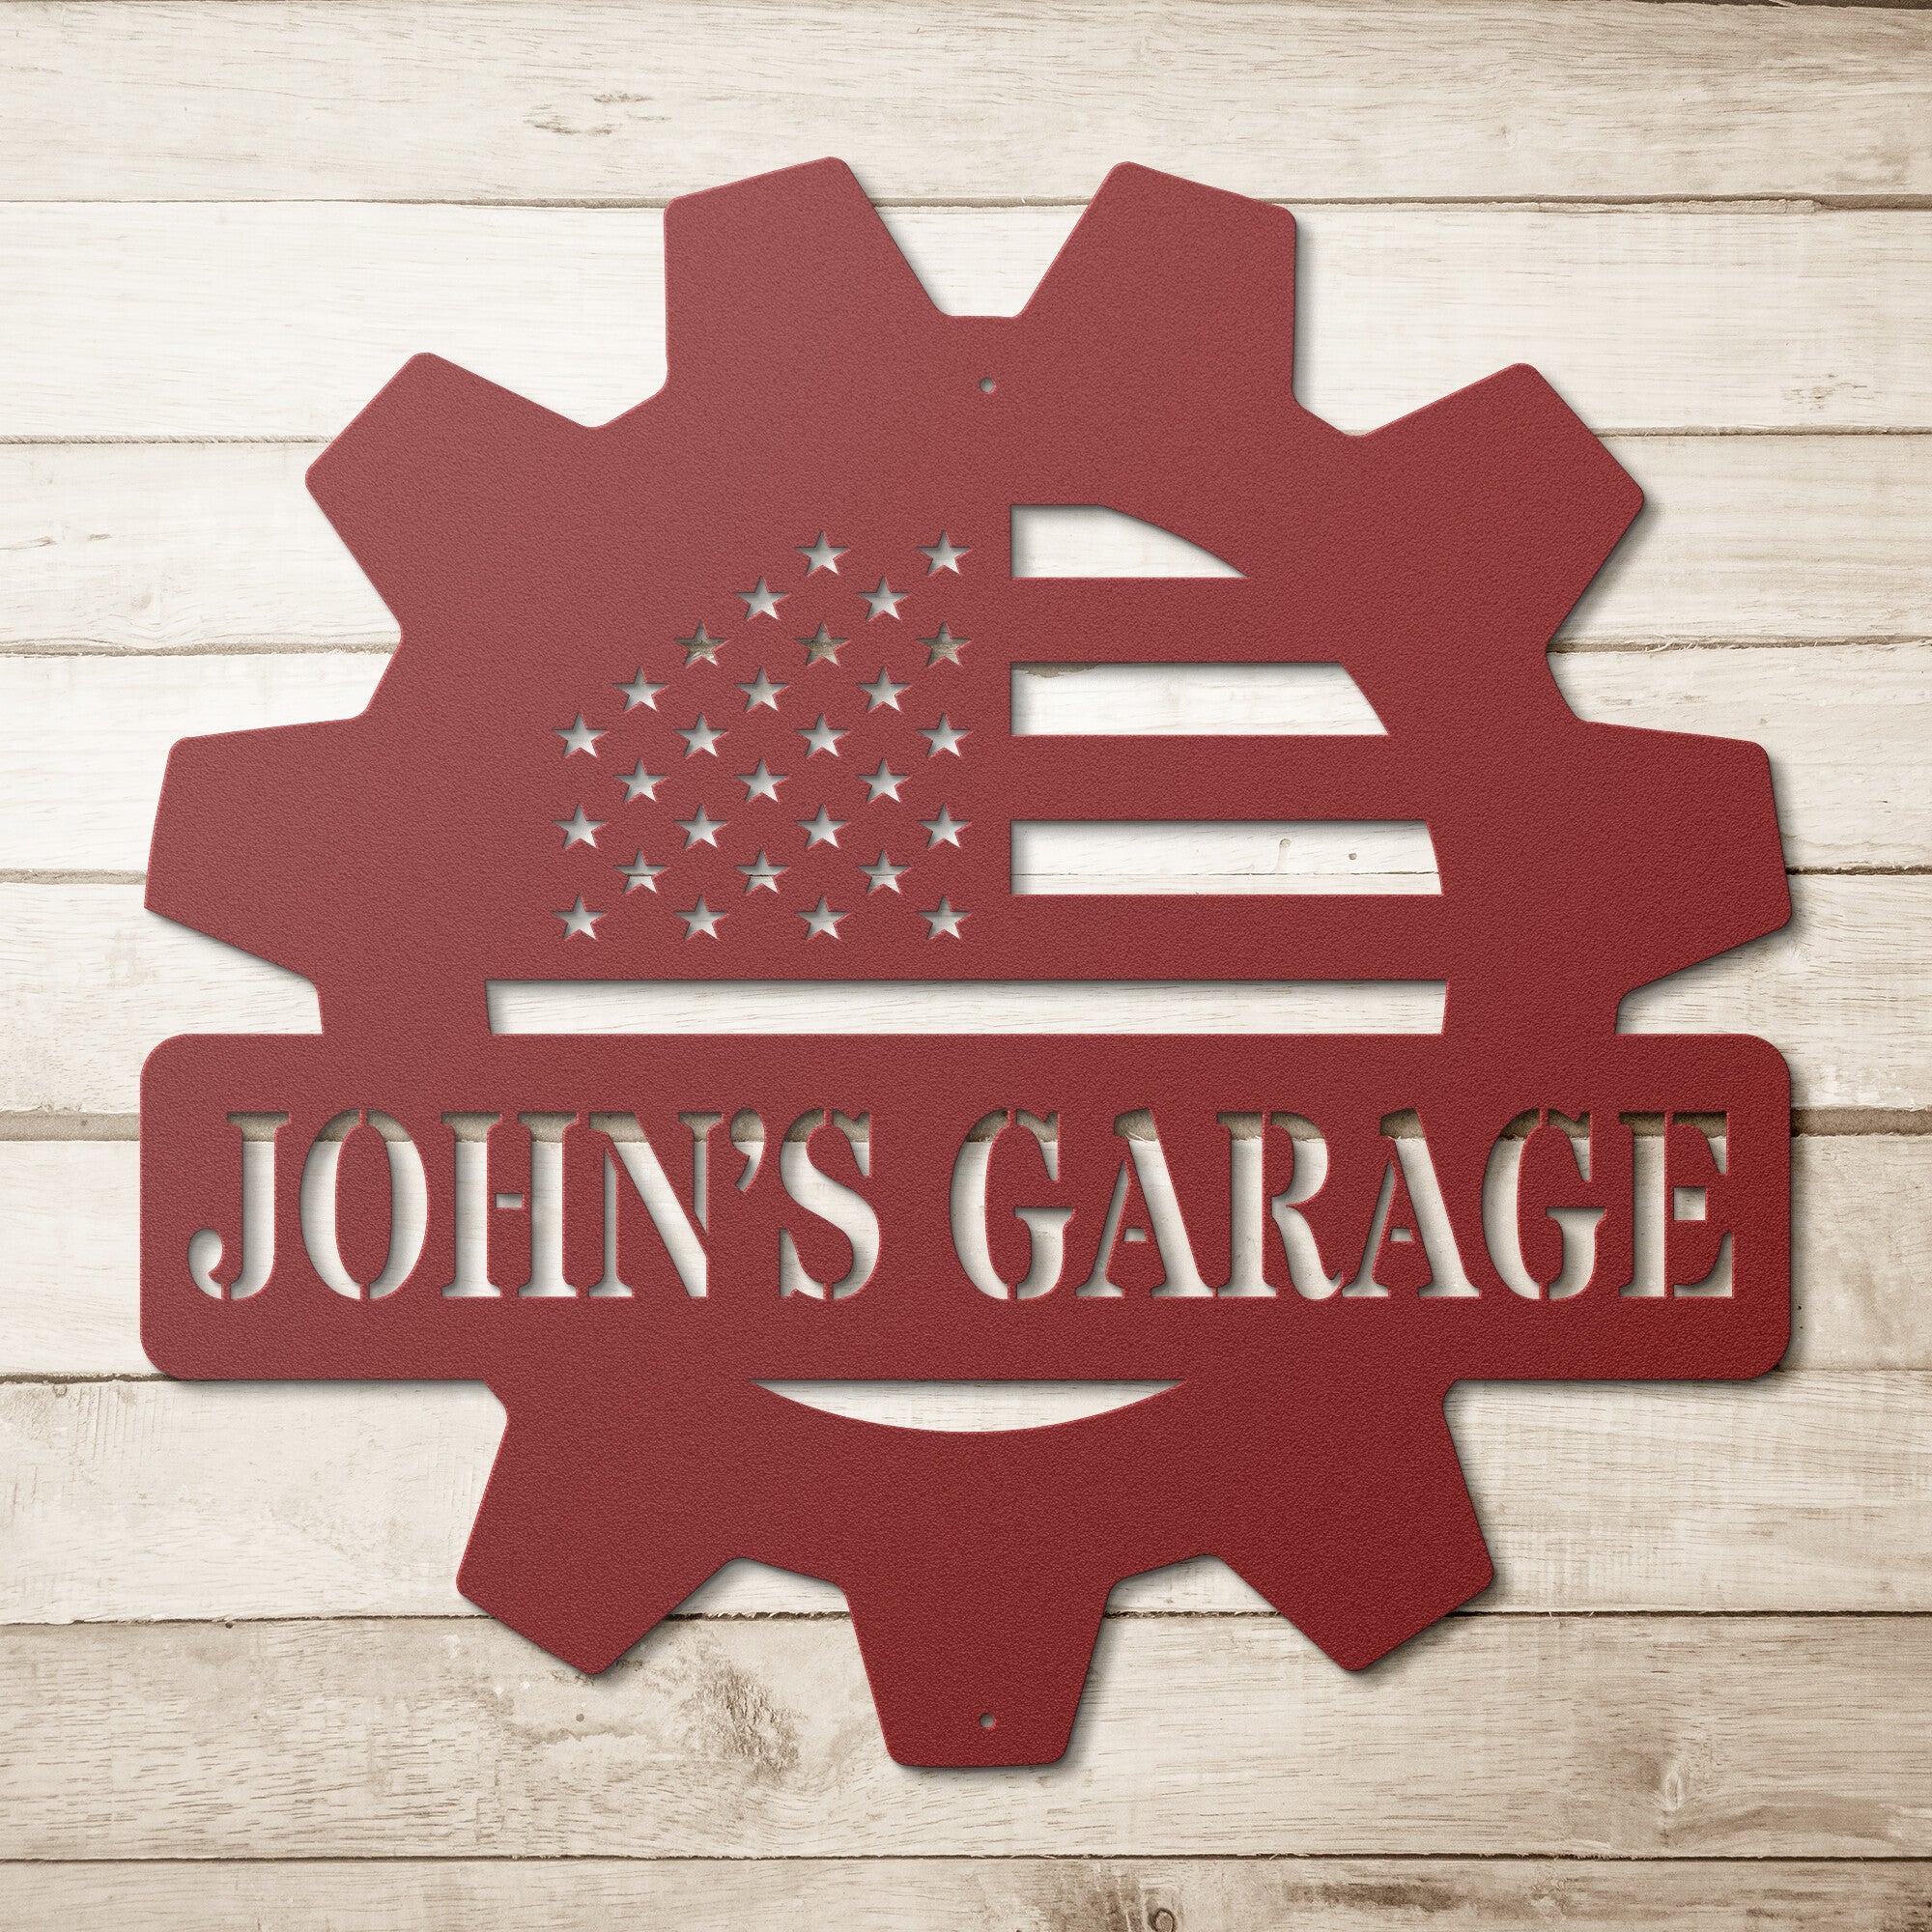 Personalized Gear Garage Sign - Cool Metal Signs